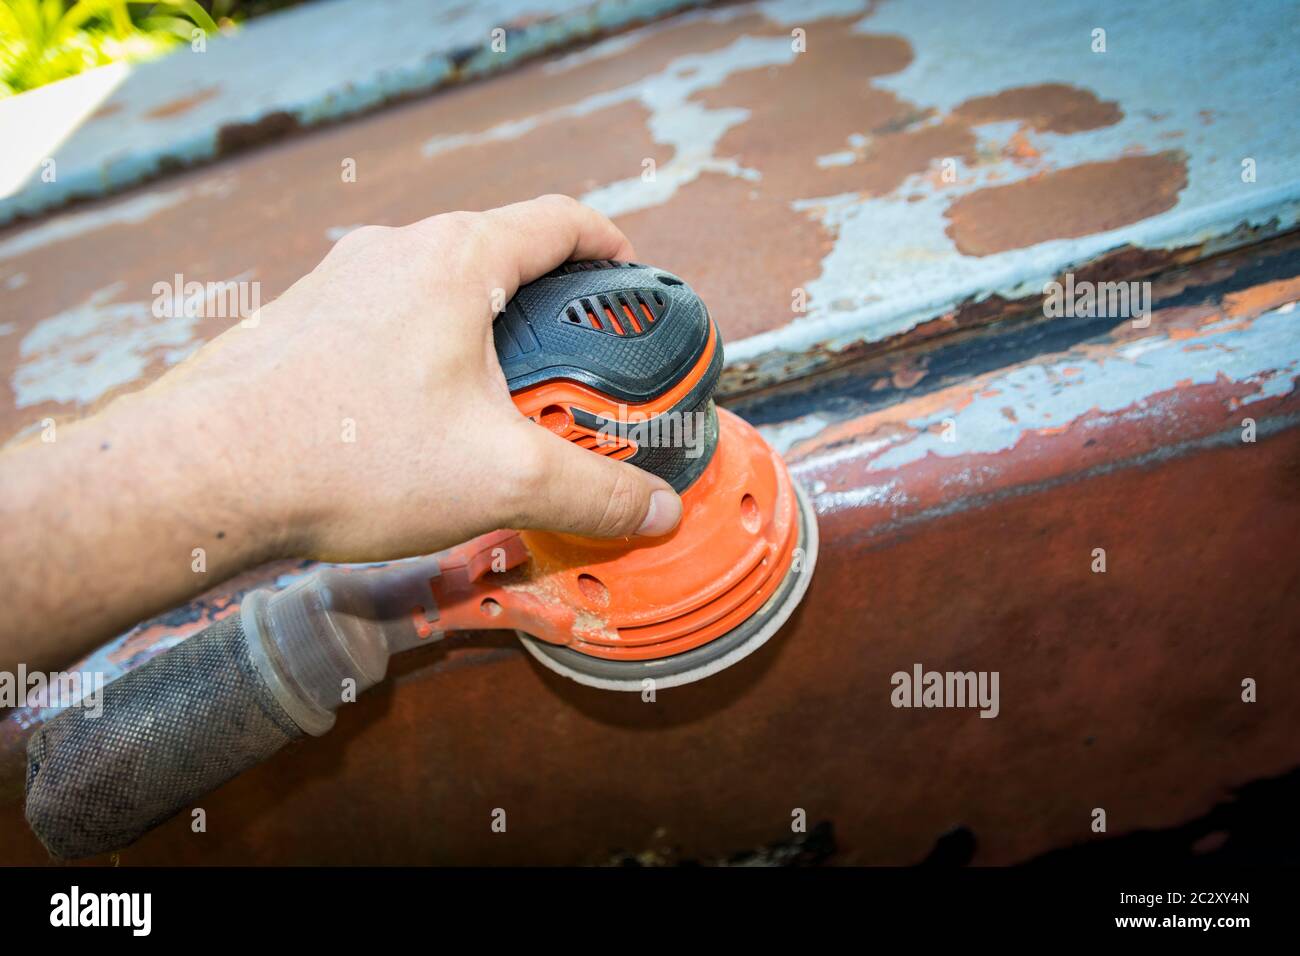 Man's hand operates a disc/orbital sander, to remove paint and rust from metal doors Stock Photo